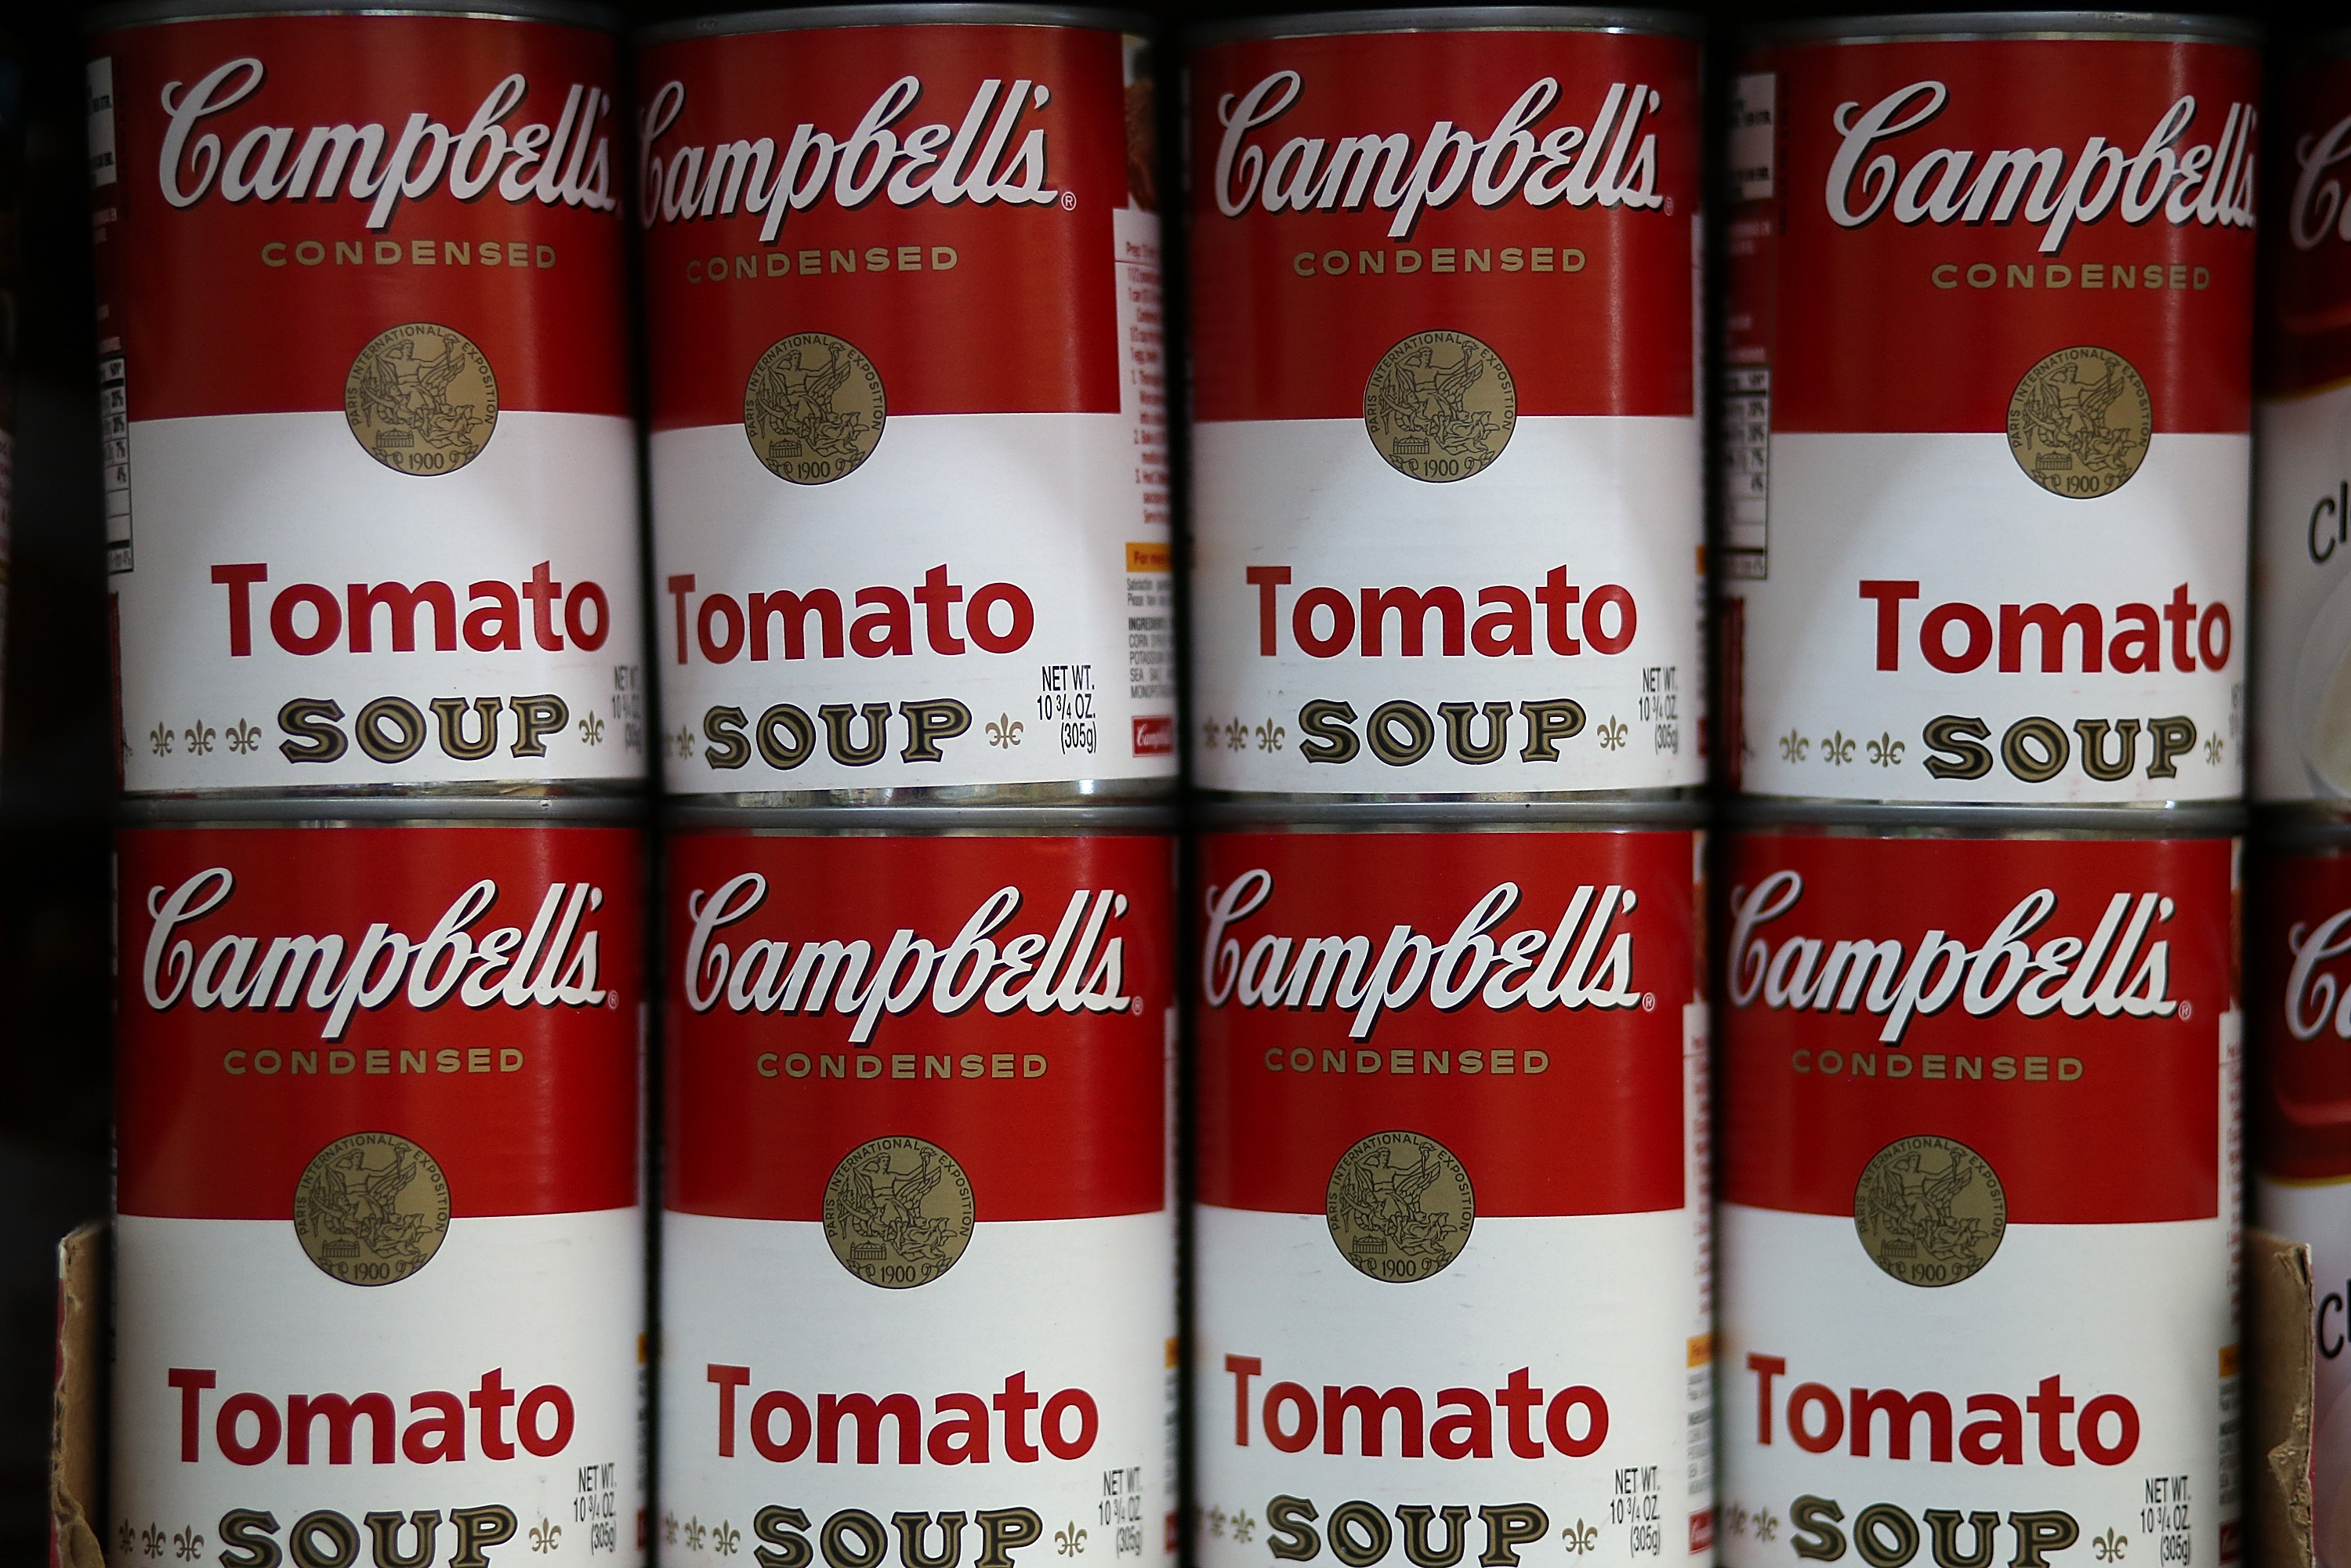 Cans of Campbell's tomato soup are displayed on a shelf at Santa Venetia Market on May 20, 2013 in San Rafael, California.